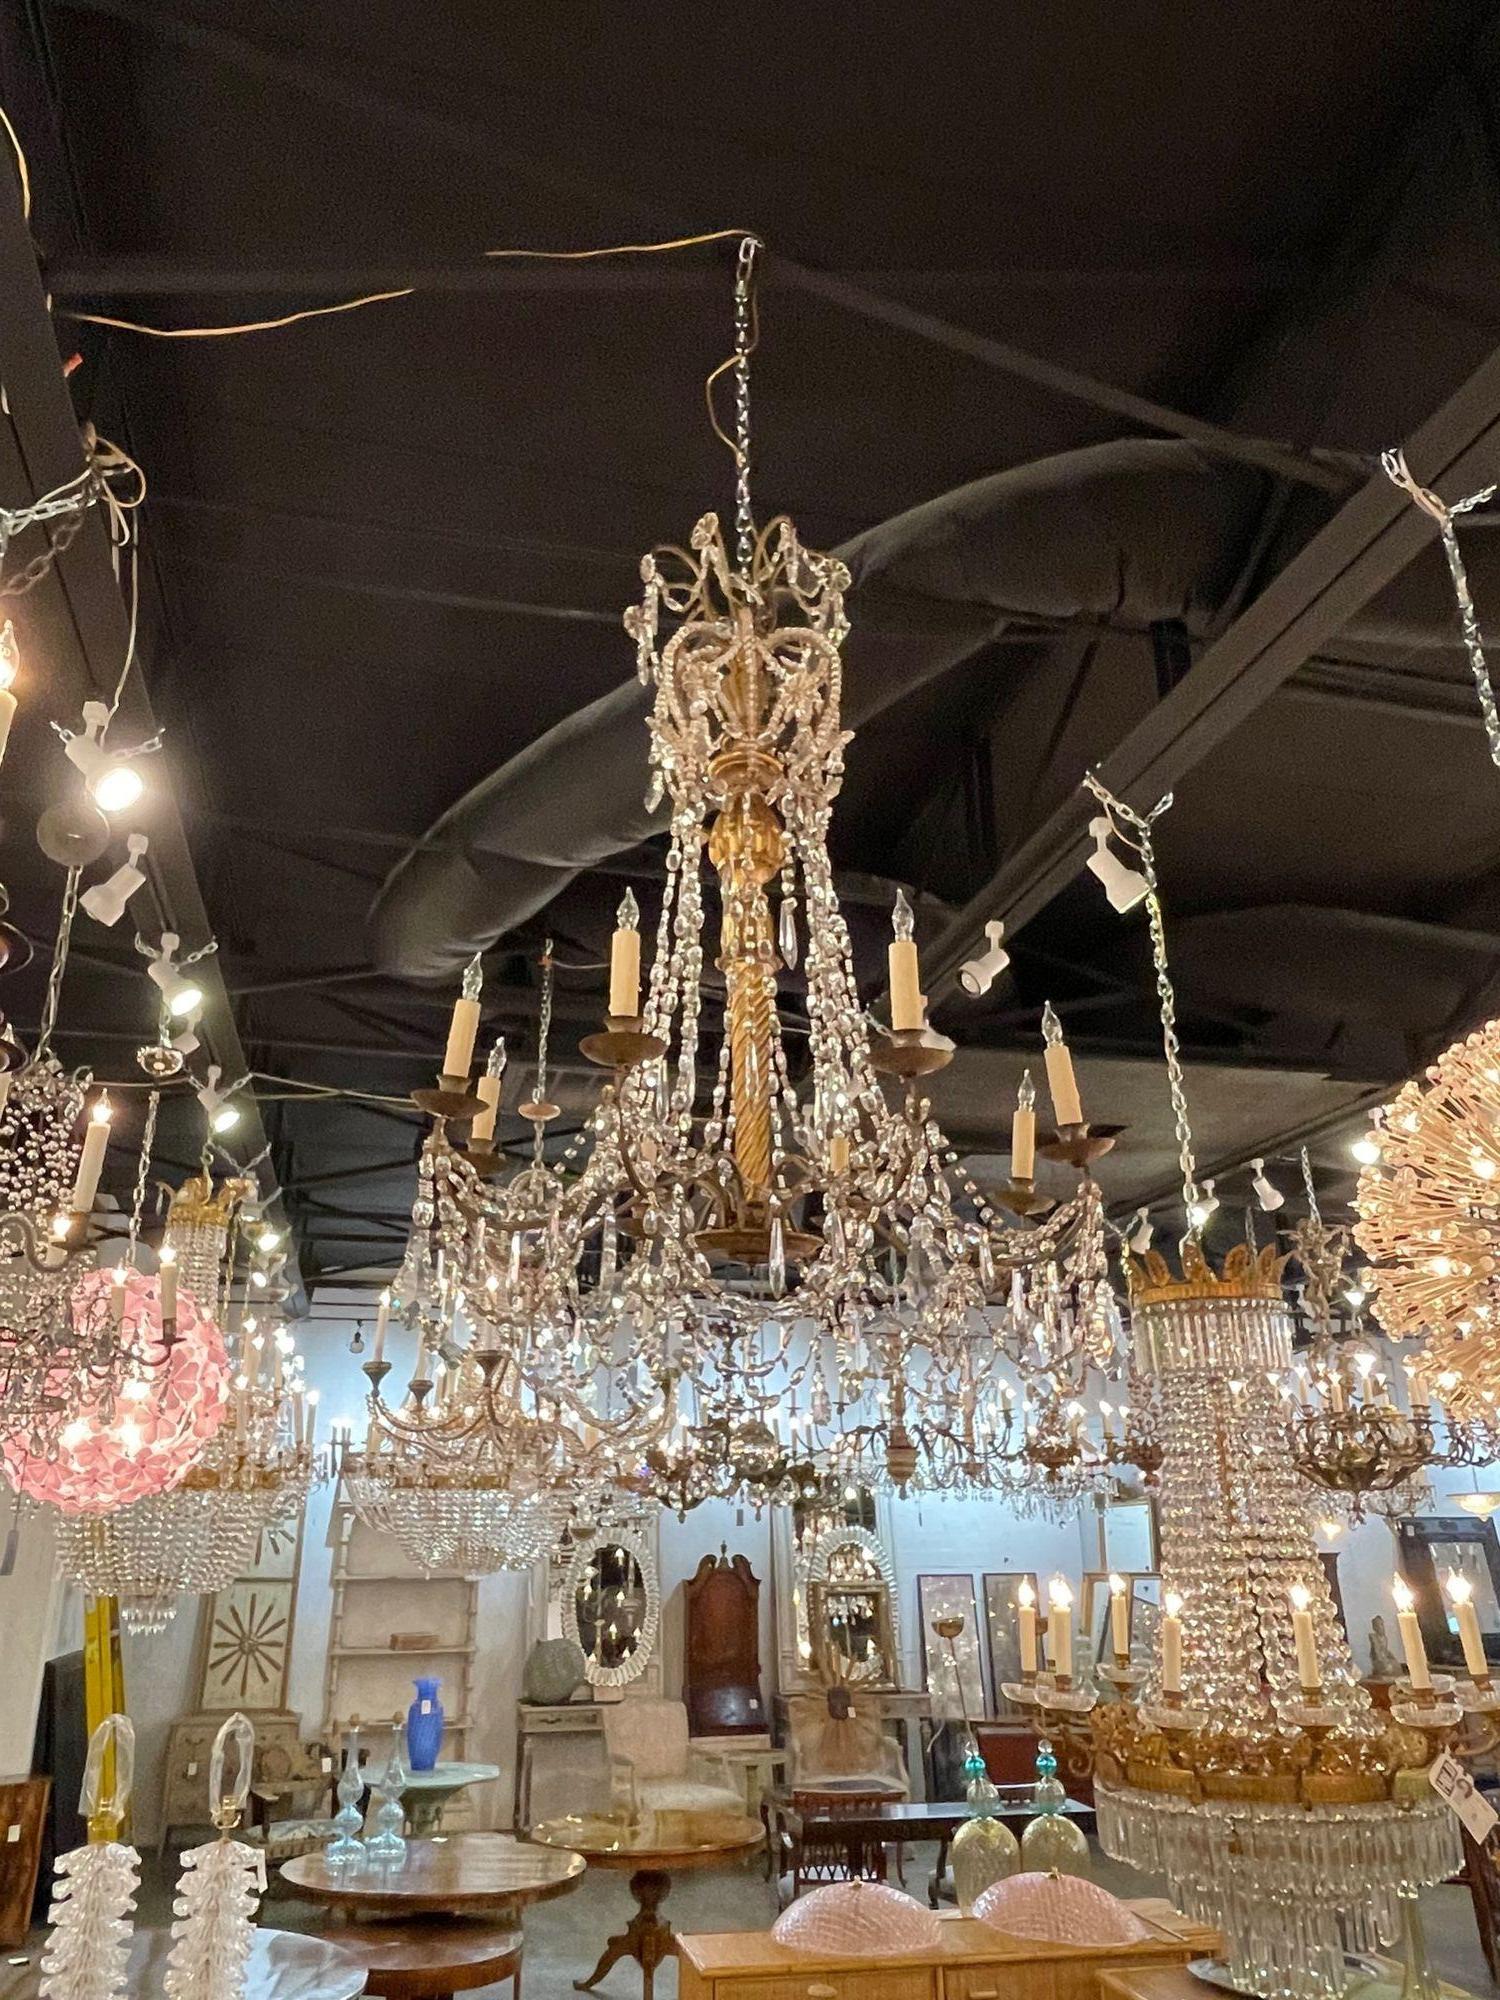 Lovely 18th century Italian giltwood and crystal chandelier with 8 lights from Genoa. A very elegant look on this fixture, featuring beads and draping crystals along with a beautifully carved based.  Outstanding!!